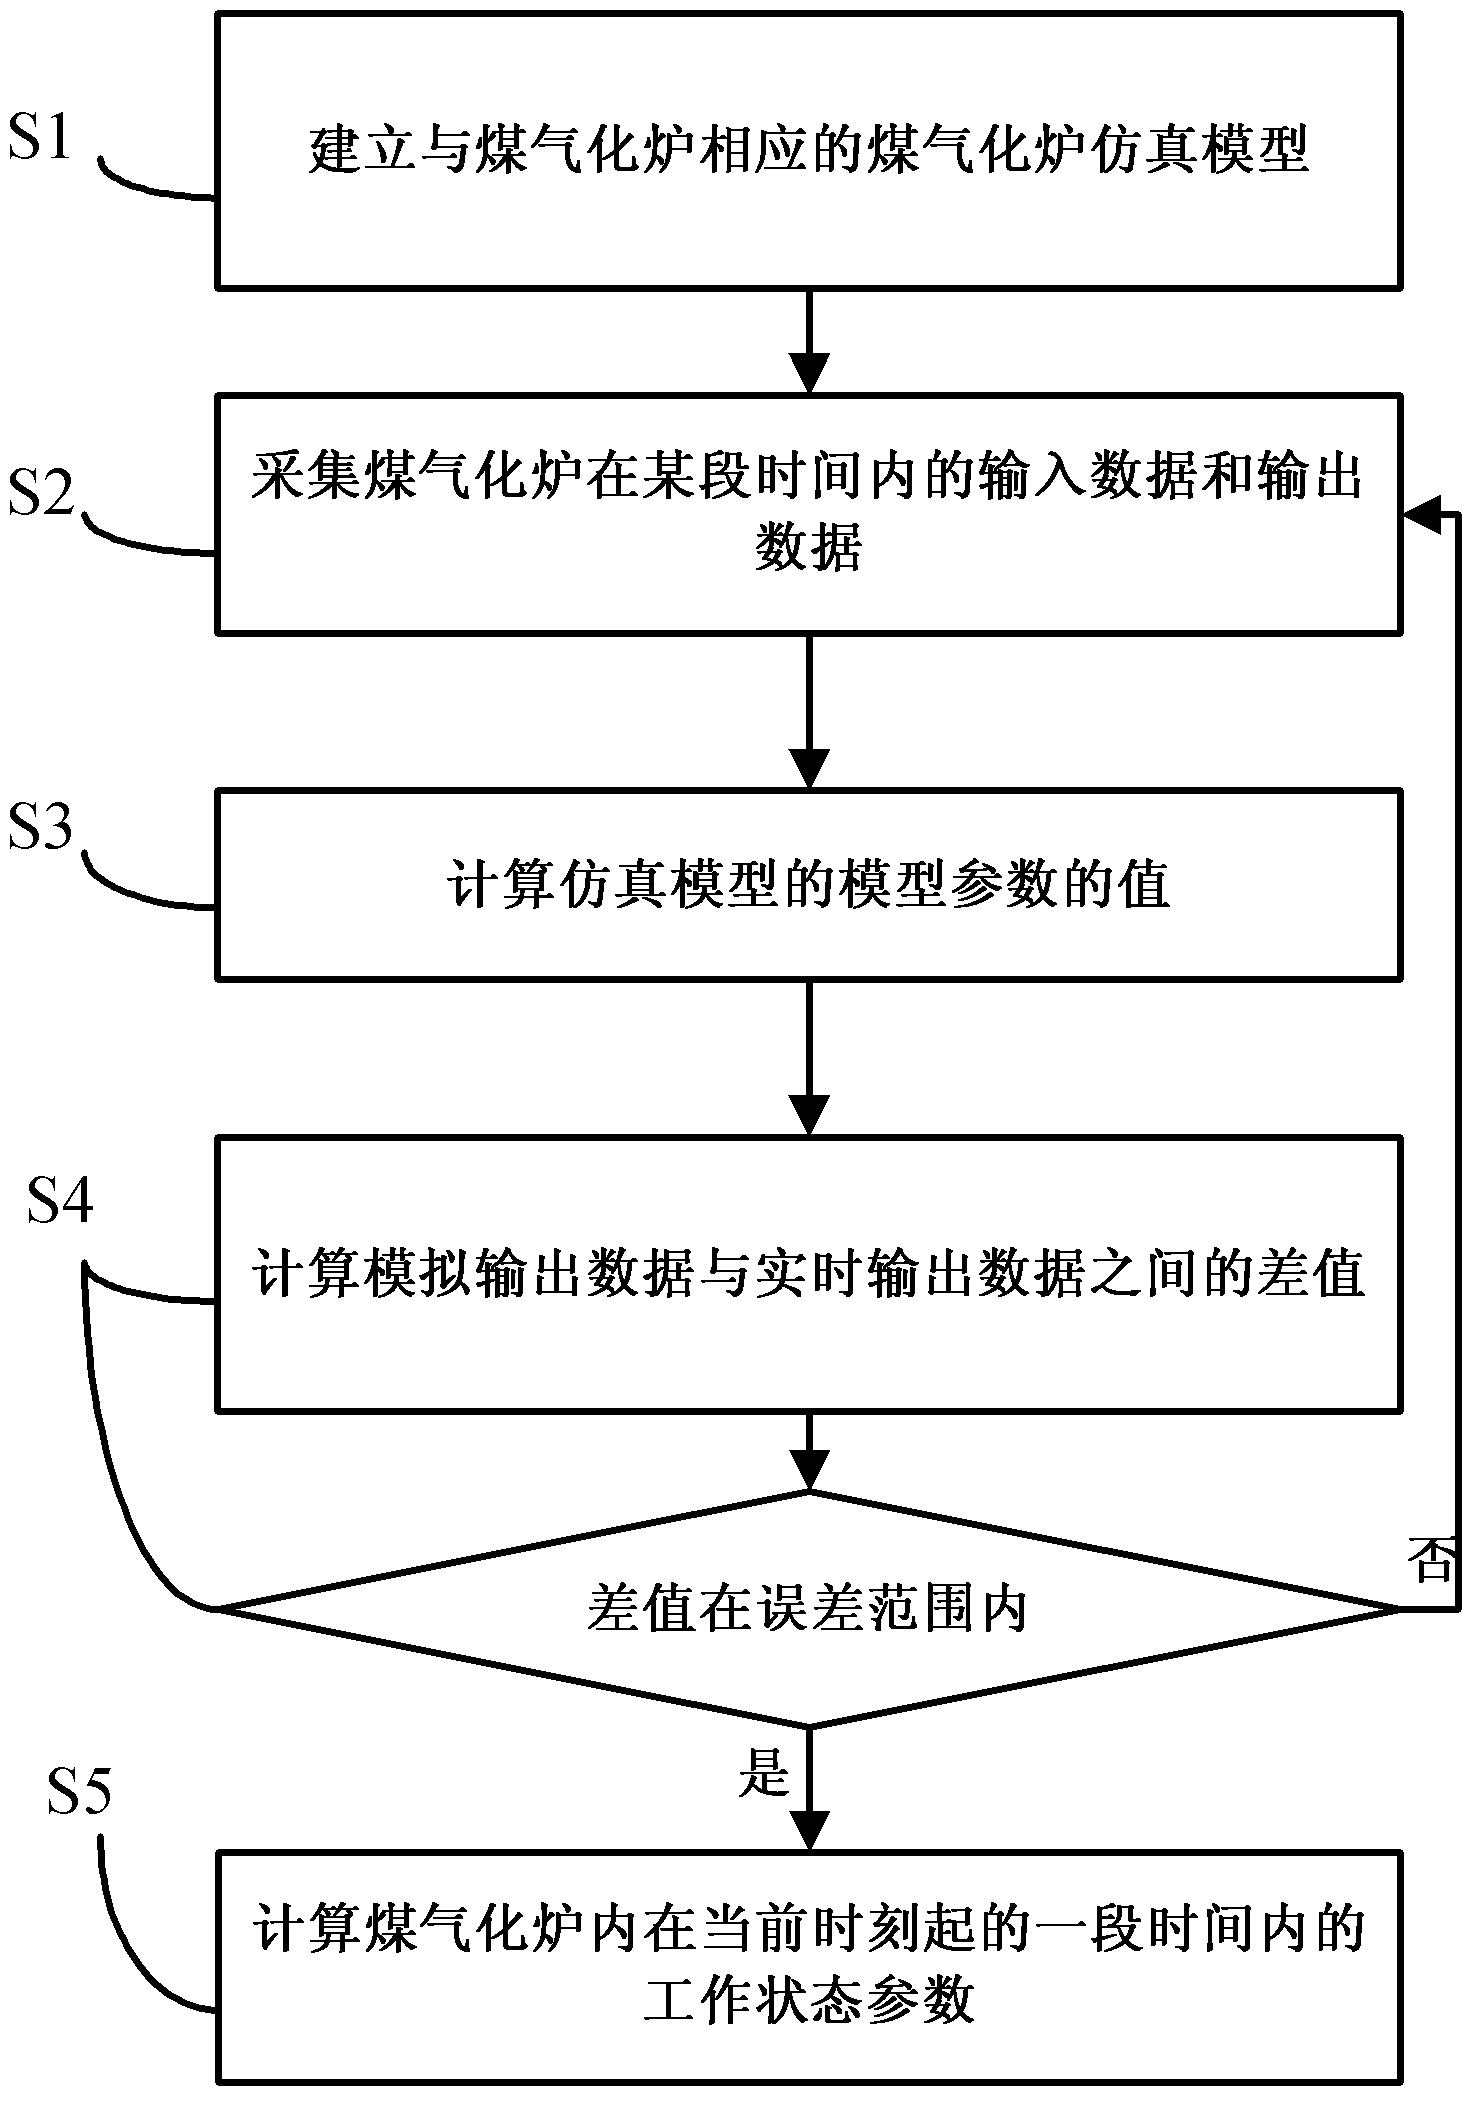 Control method for coal gasifier